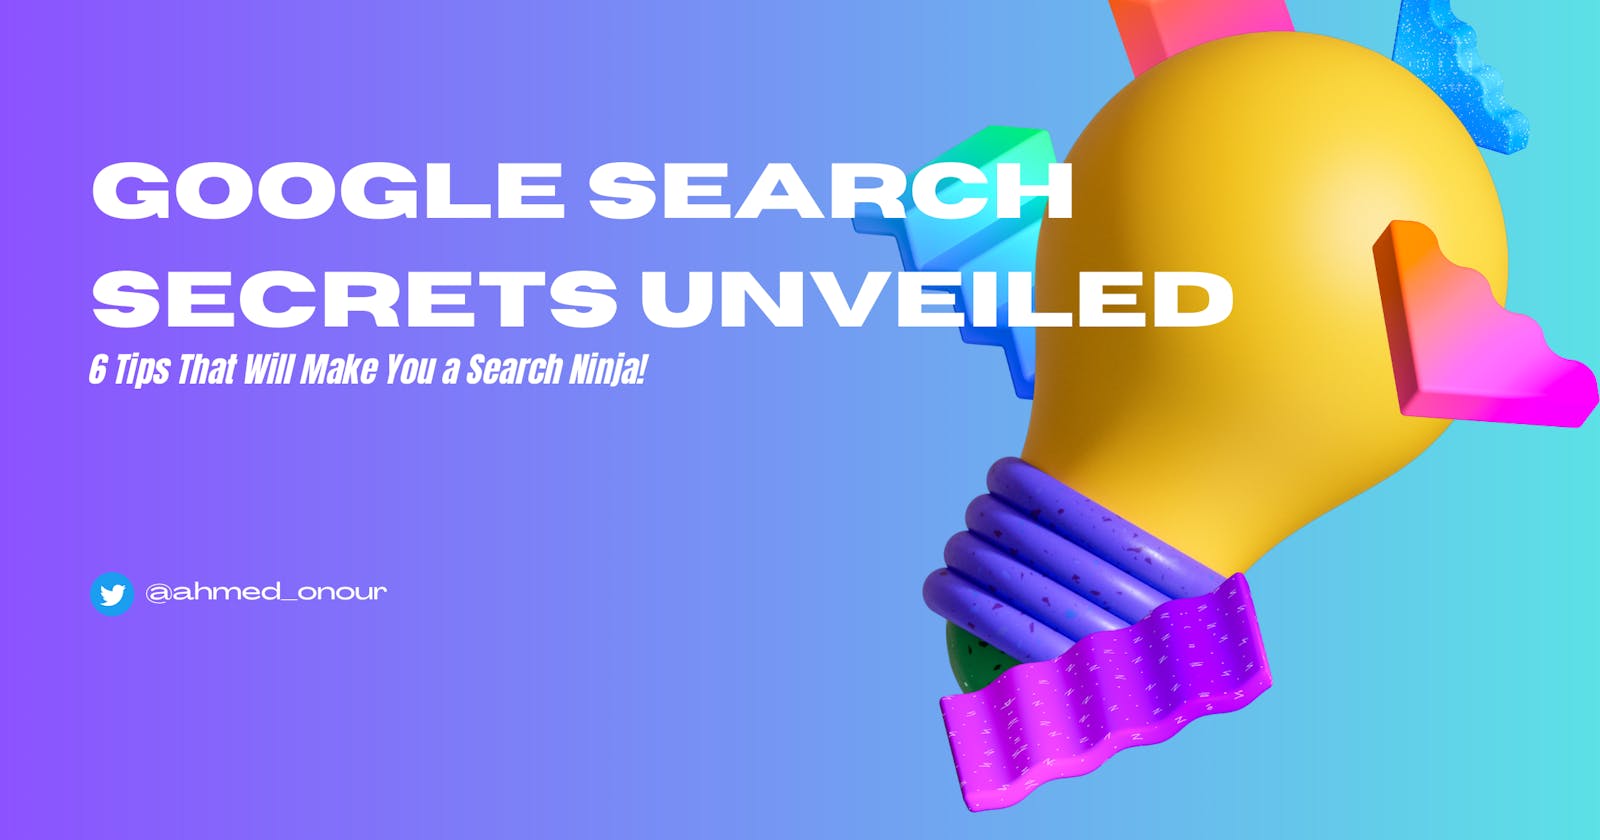 Google Search Secrets Unveiled: 6 Tips That Will Make You a Search Ninja!